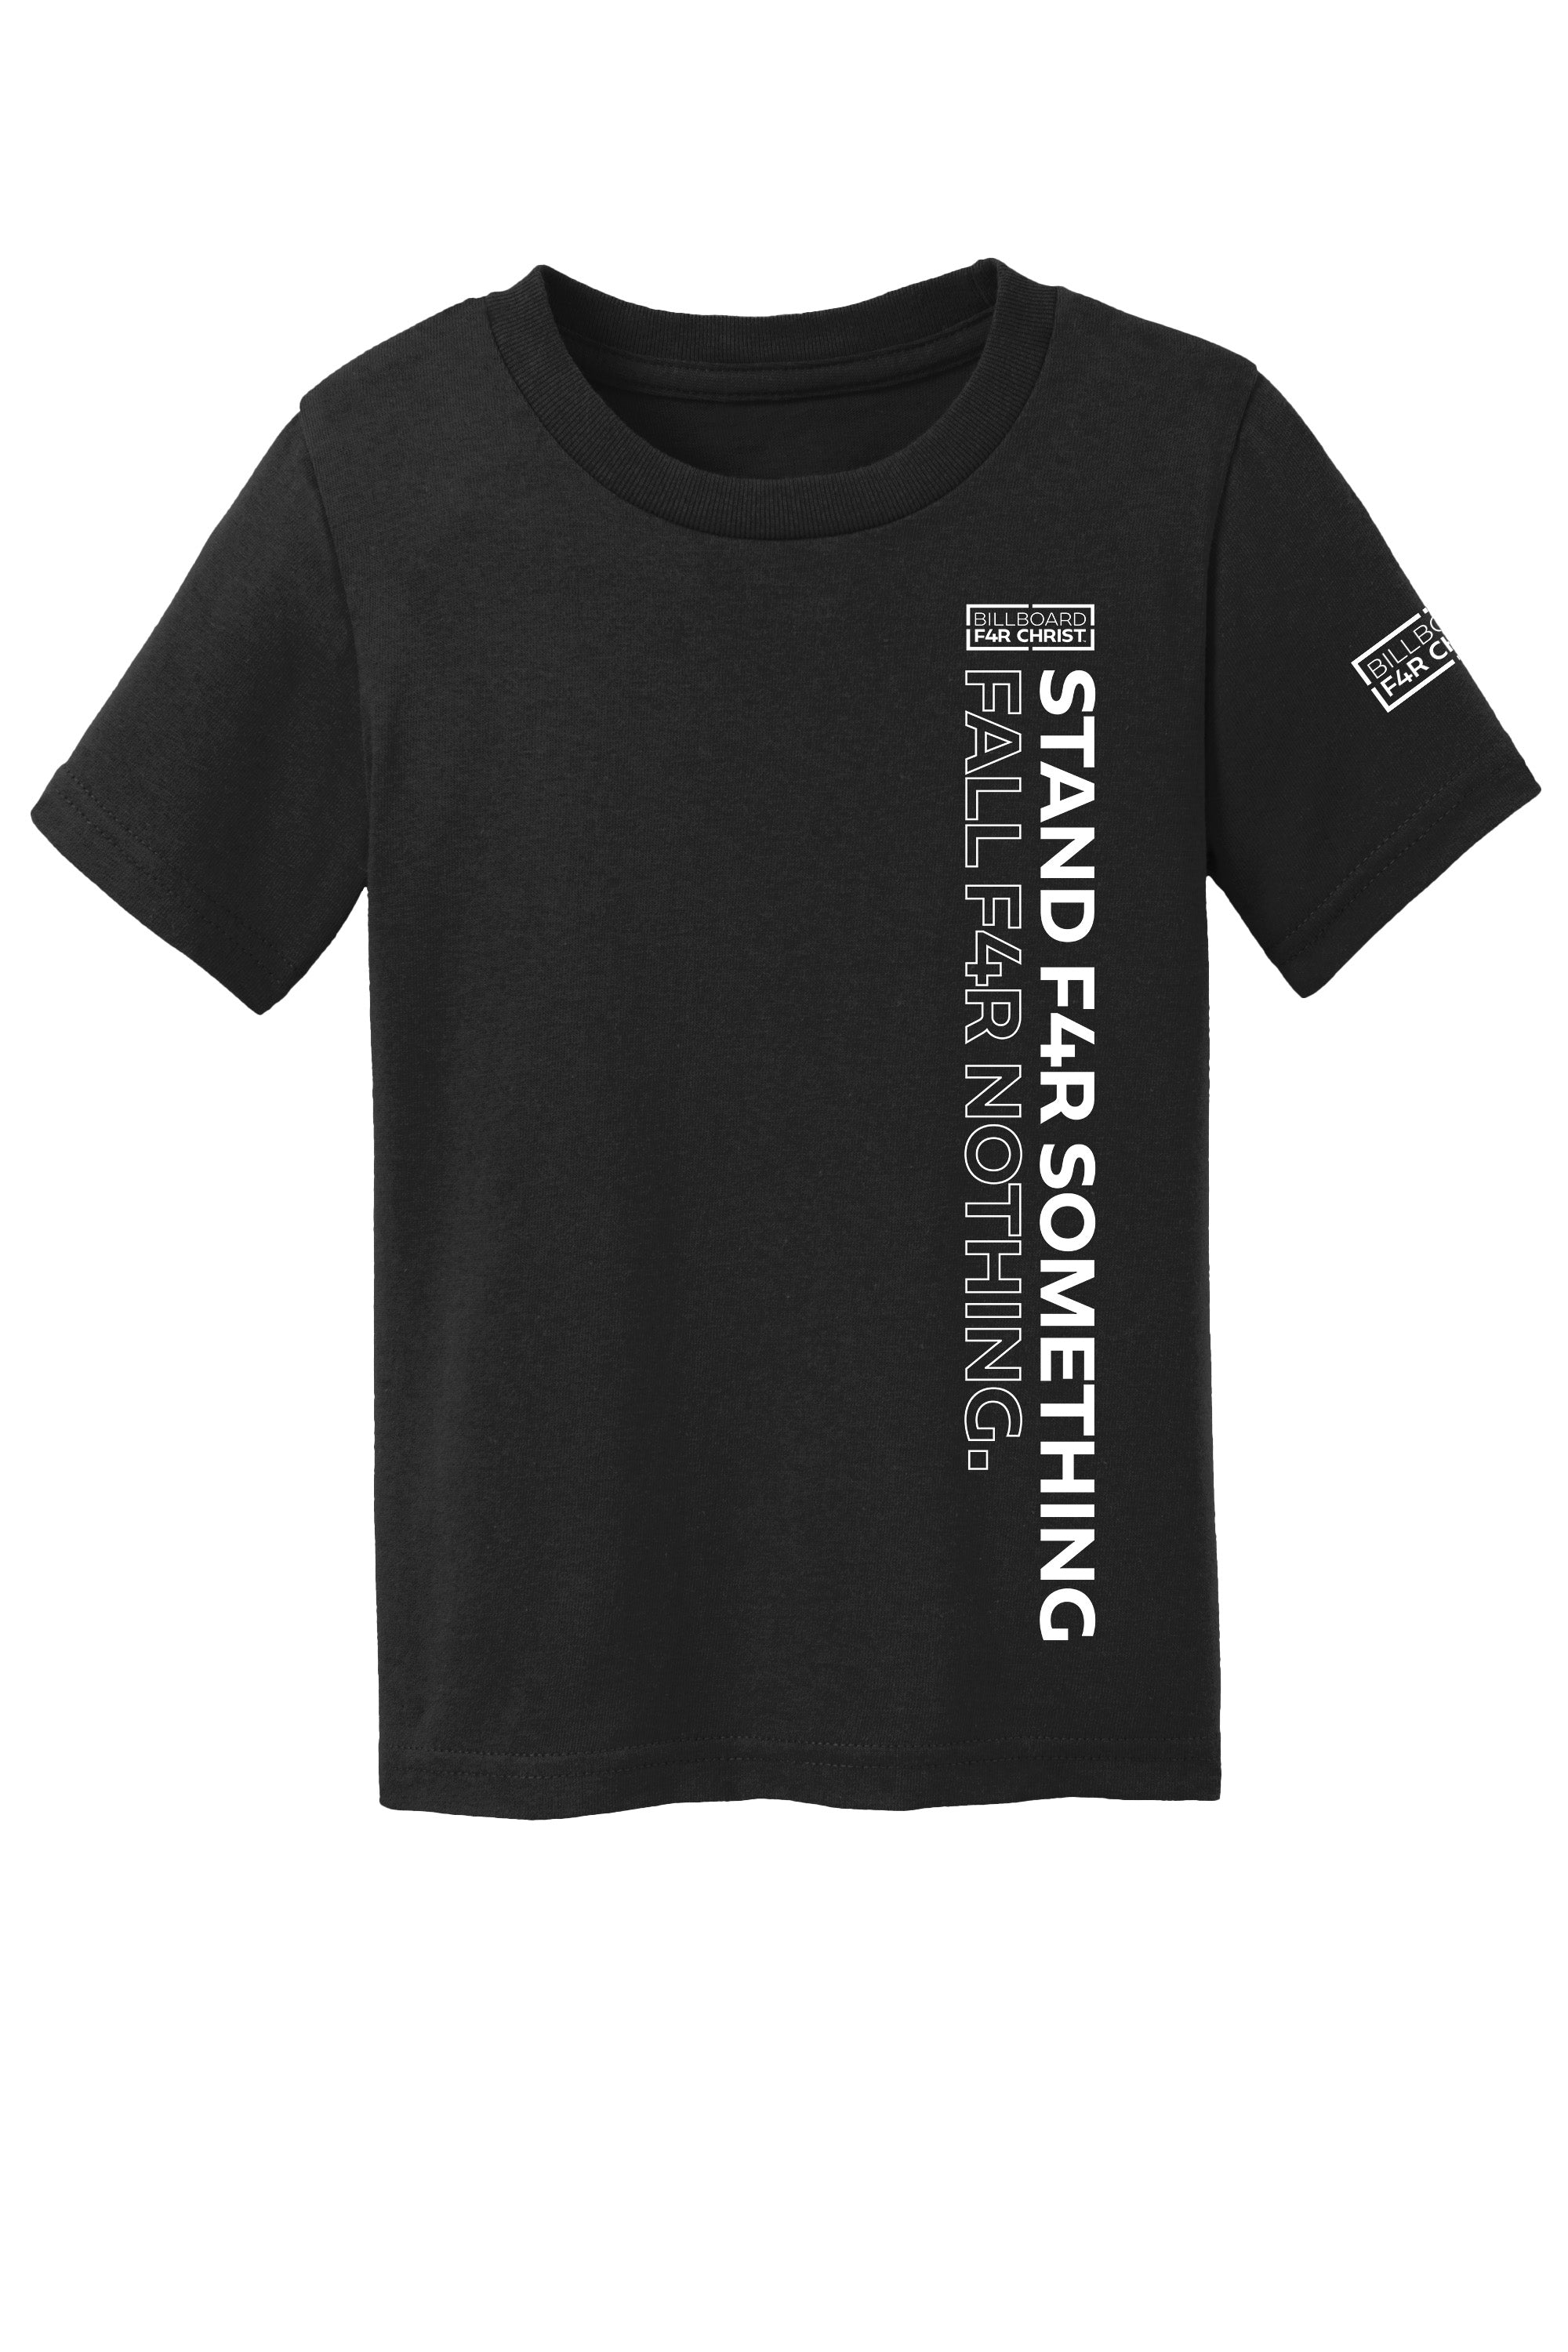 Stand F4R Something Toddler T-Shirt